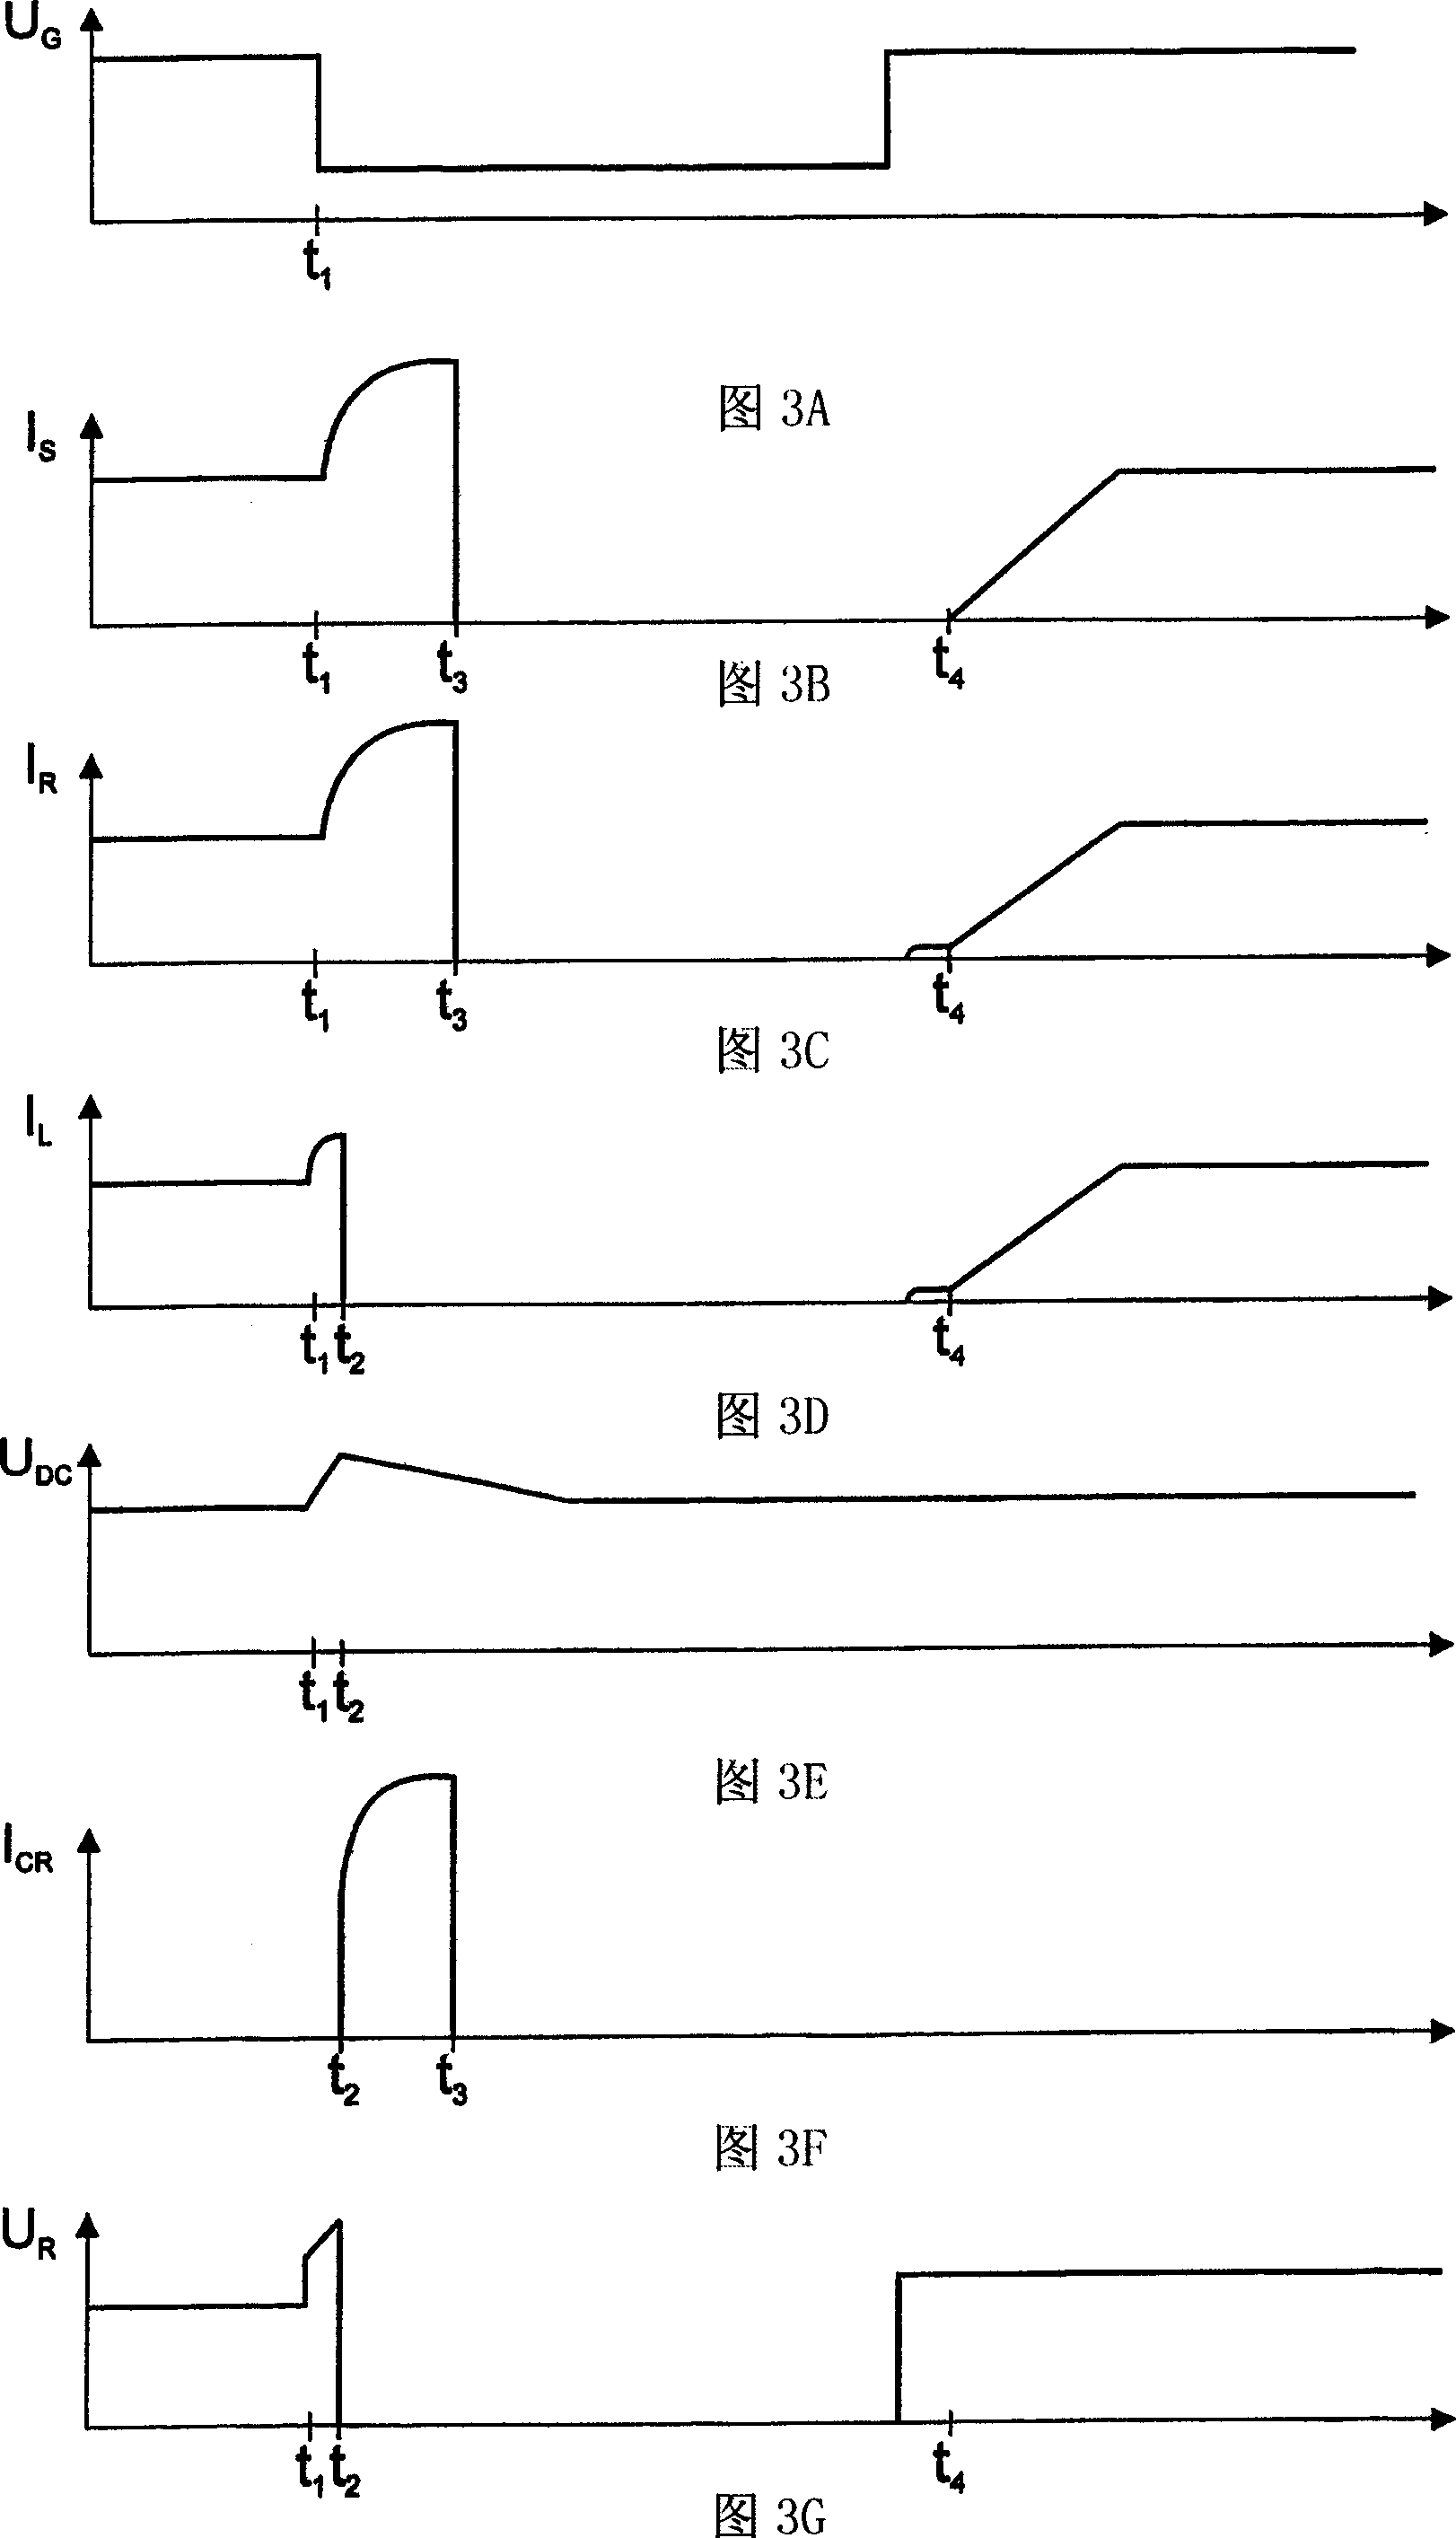 Control and protection of a doubly-fed induction generator system